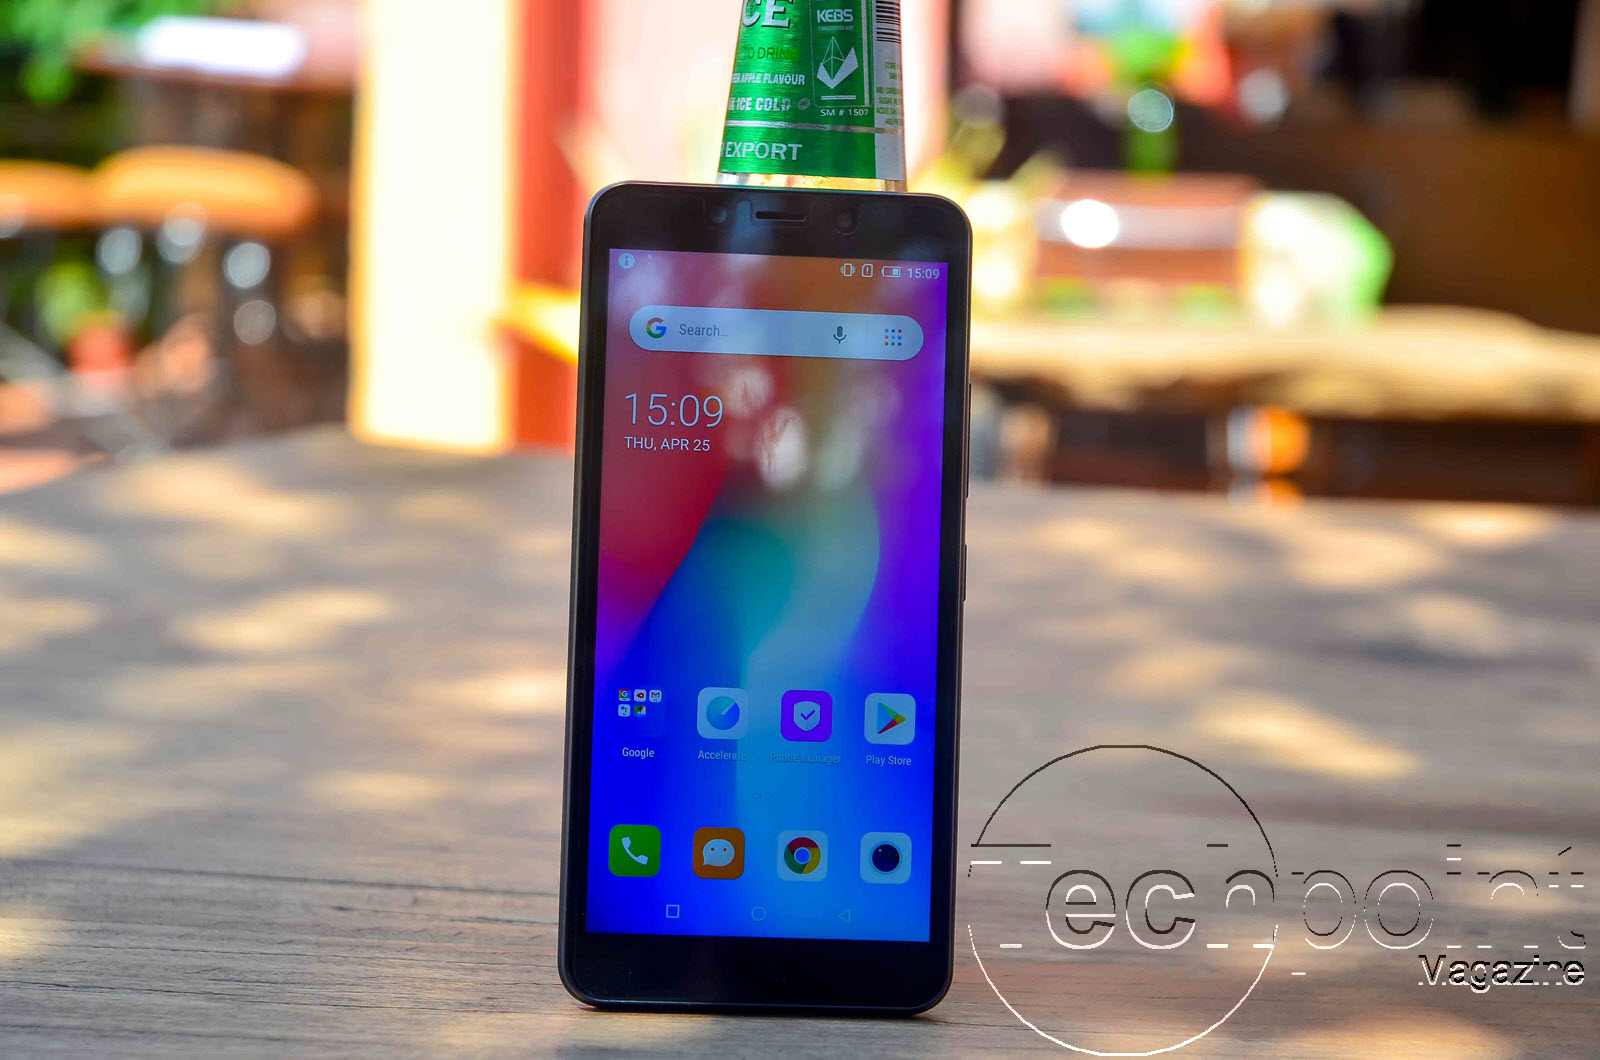 ITEL P33 smartphone price and features